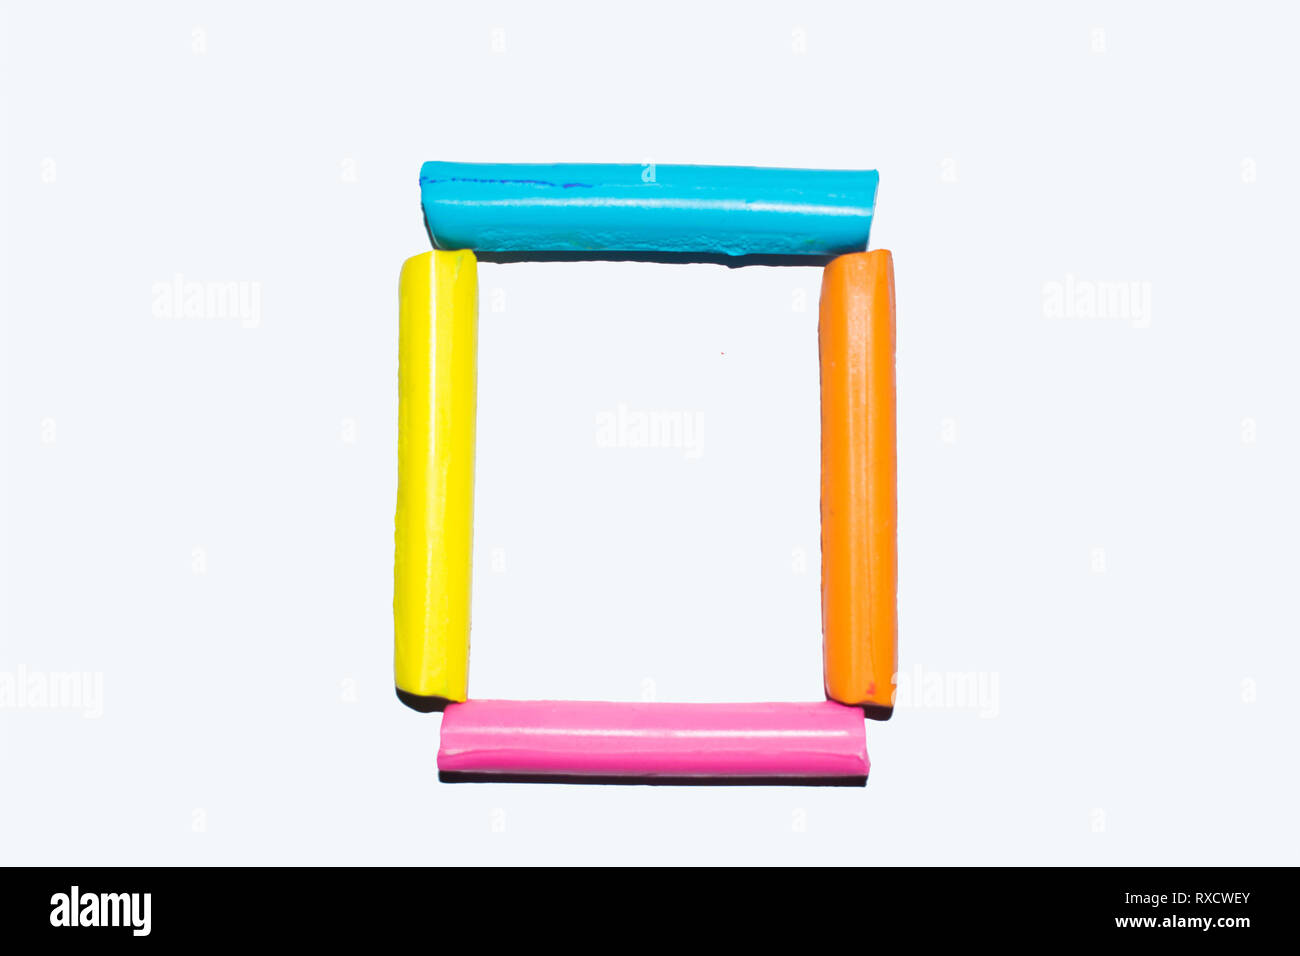 Colorful clay sticks forming a square shape on a white background Stock Photo